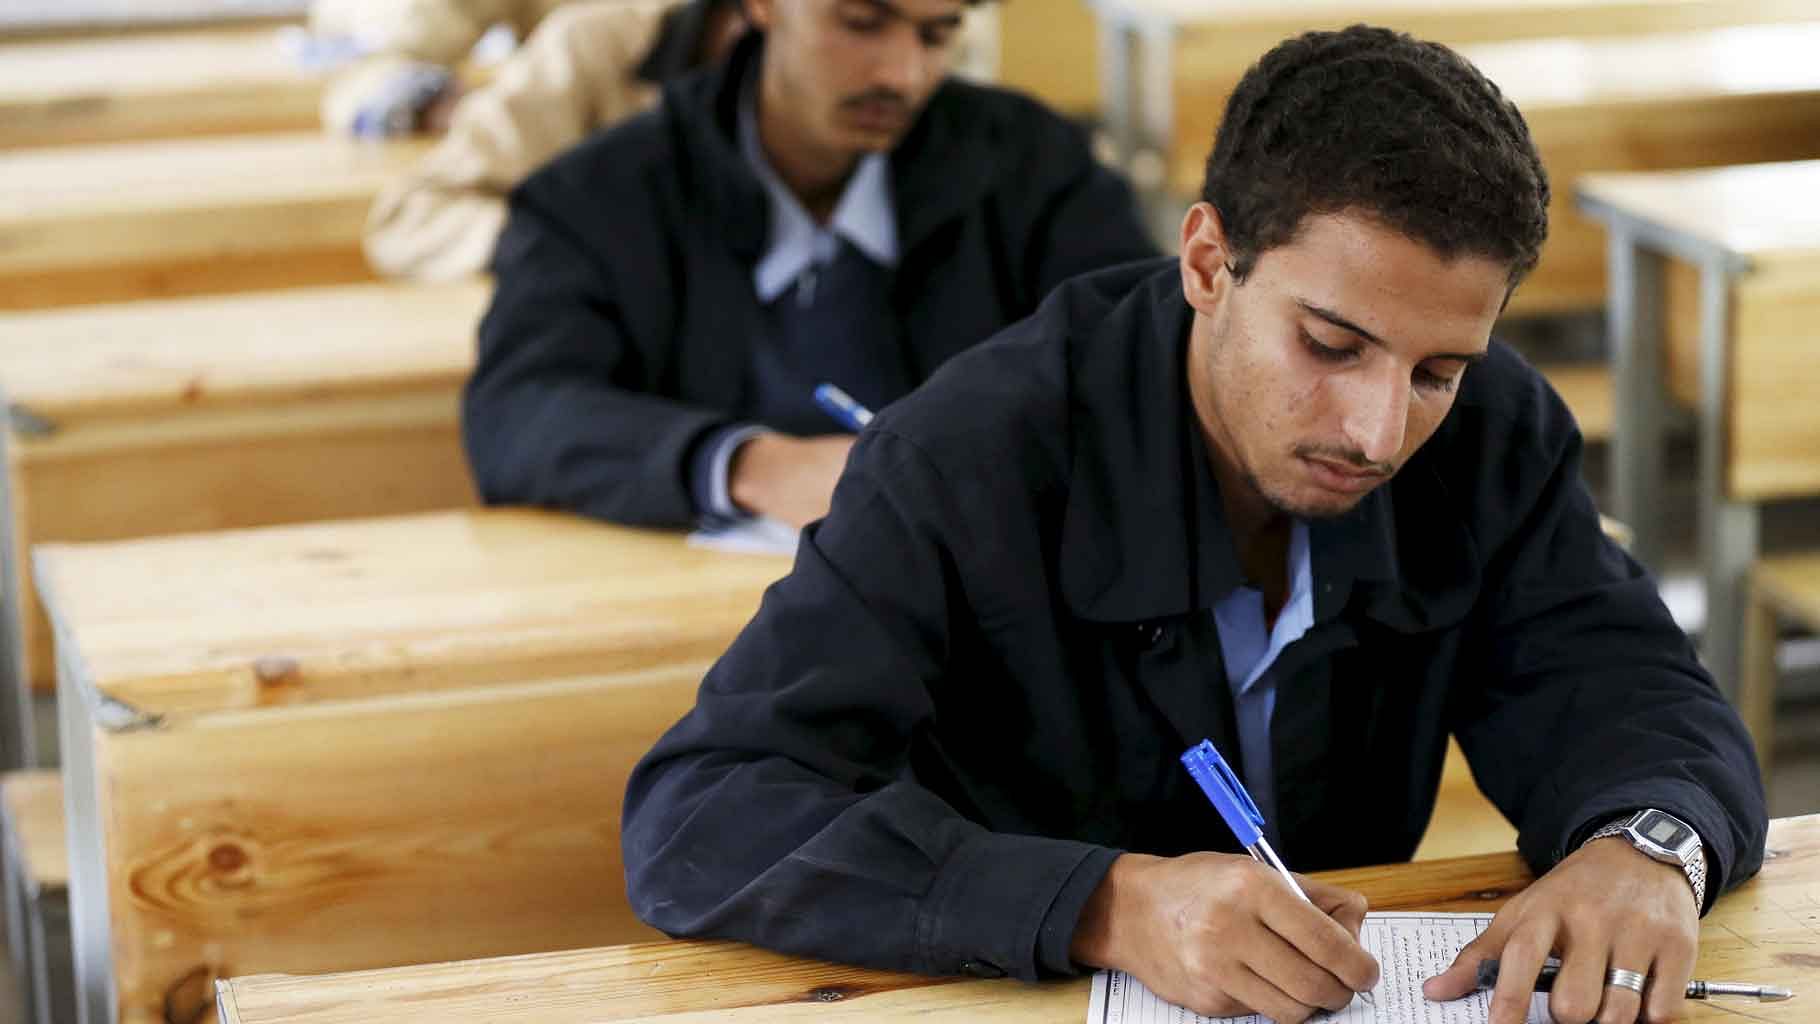 The chemistry exam was first held on 21 March. The re-exam is now scheduled for 12 April with 1.74 lakh students appearing for the exam. (Photo: Reuters)